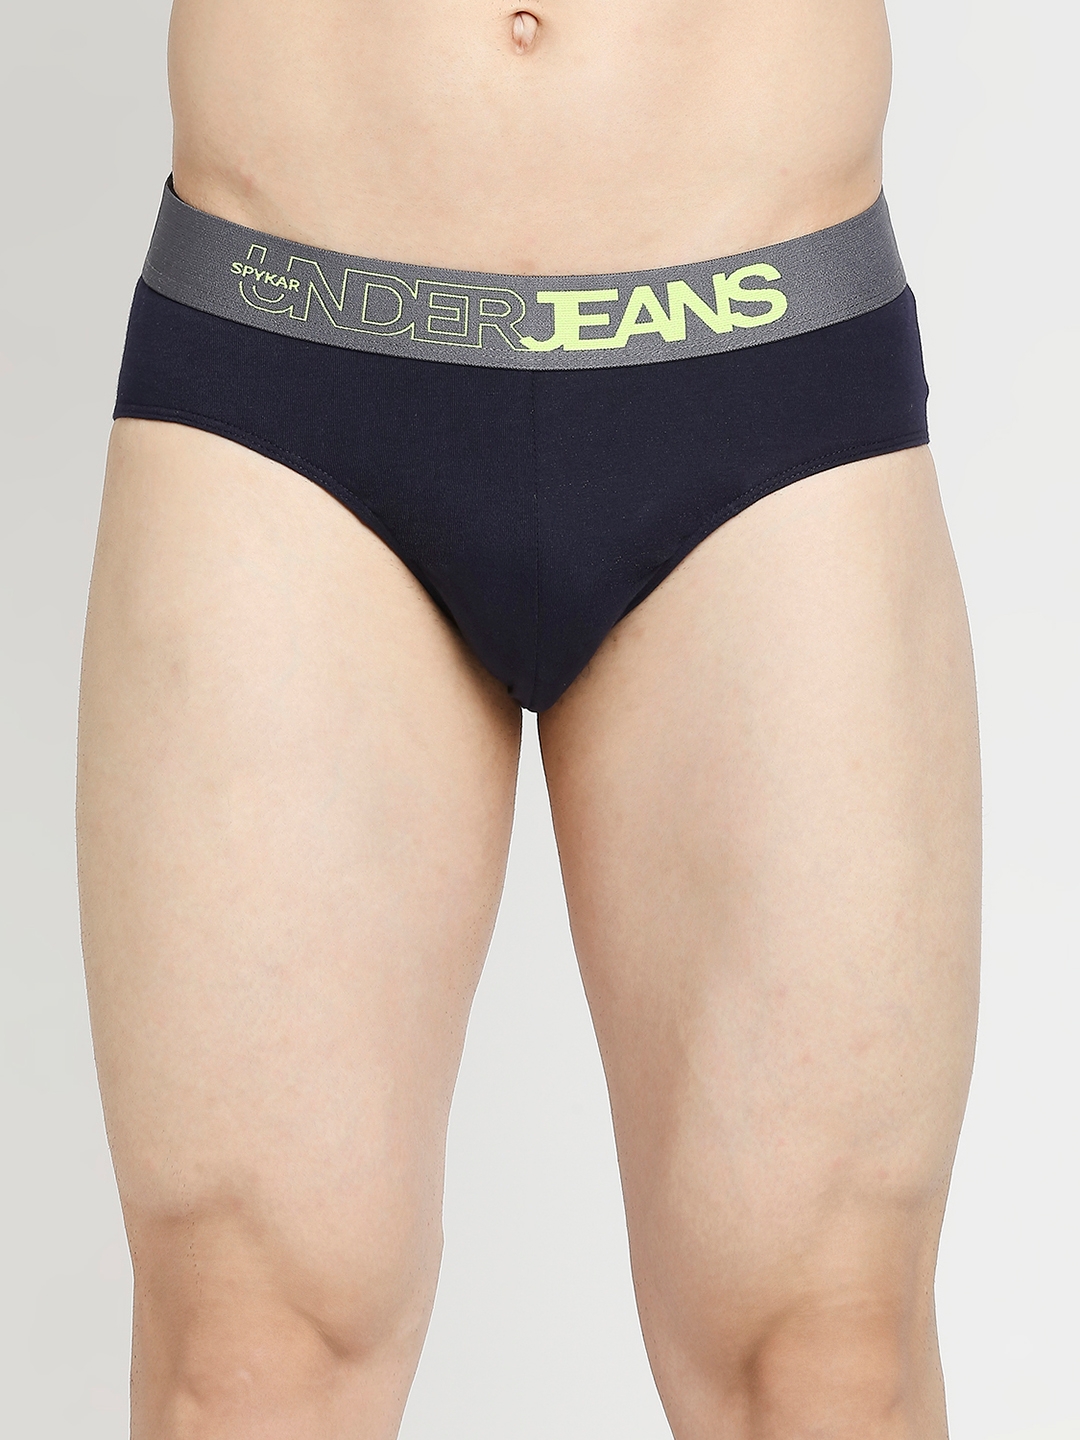 Underjeans By Spykar Yellow & Navy Blue Cotton Blend Brief - Pack Of 2